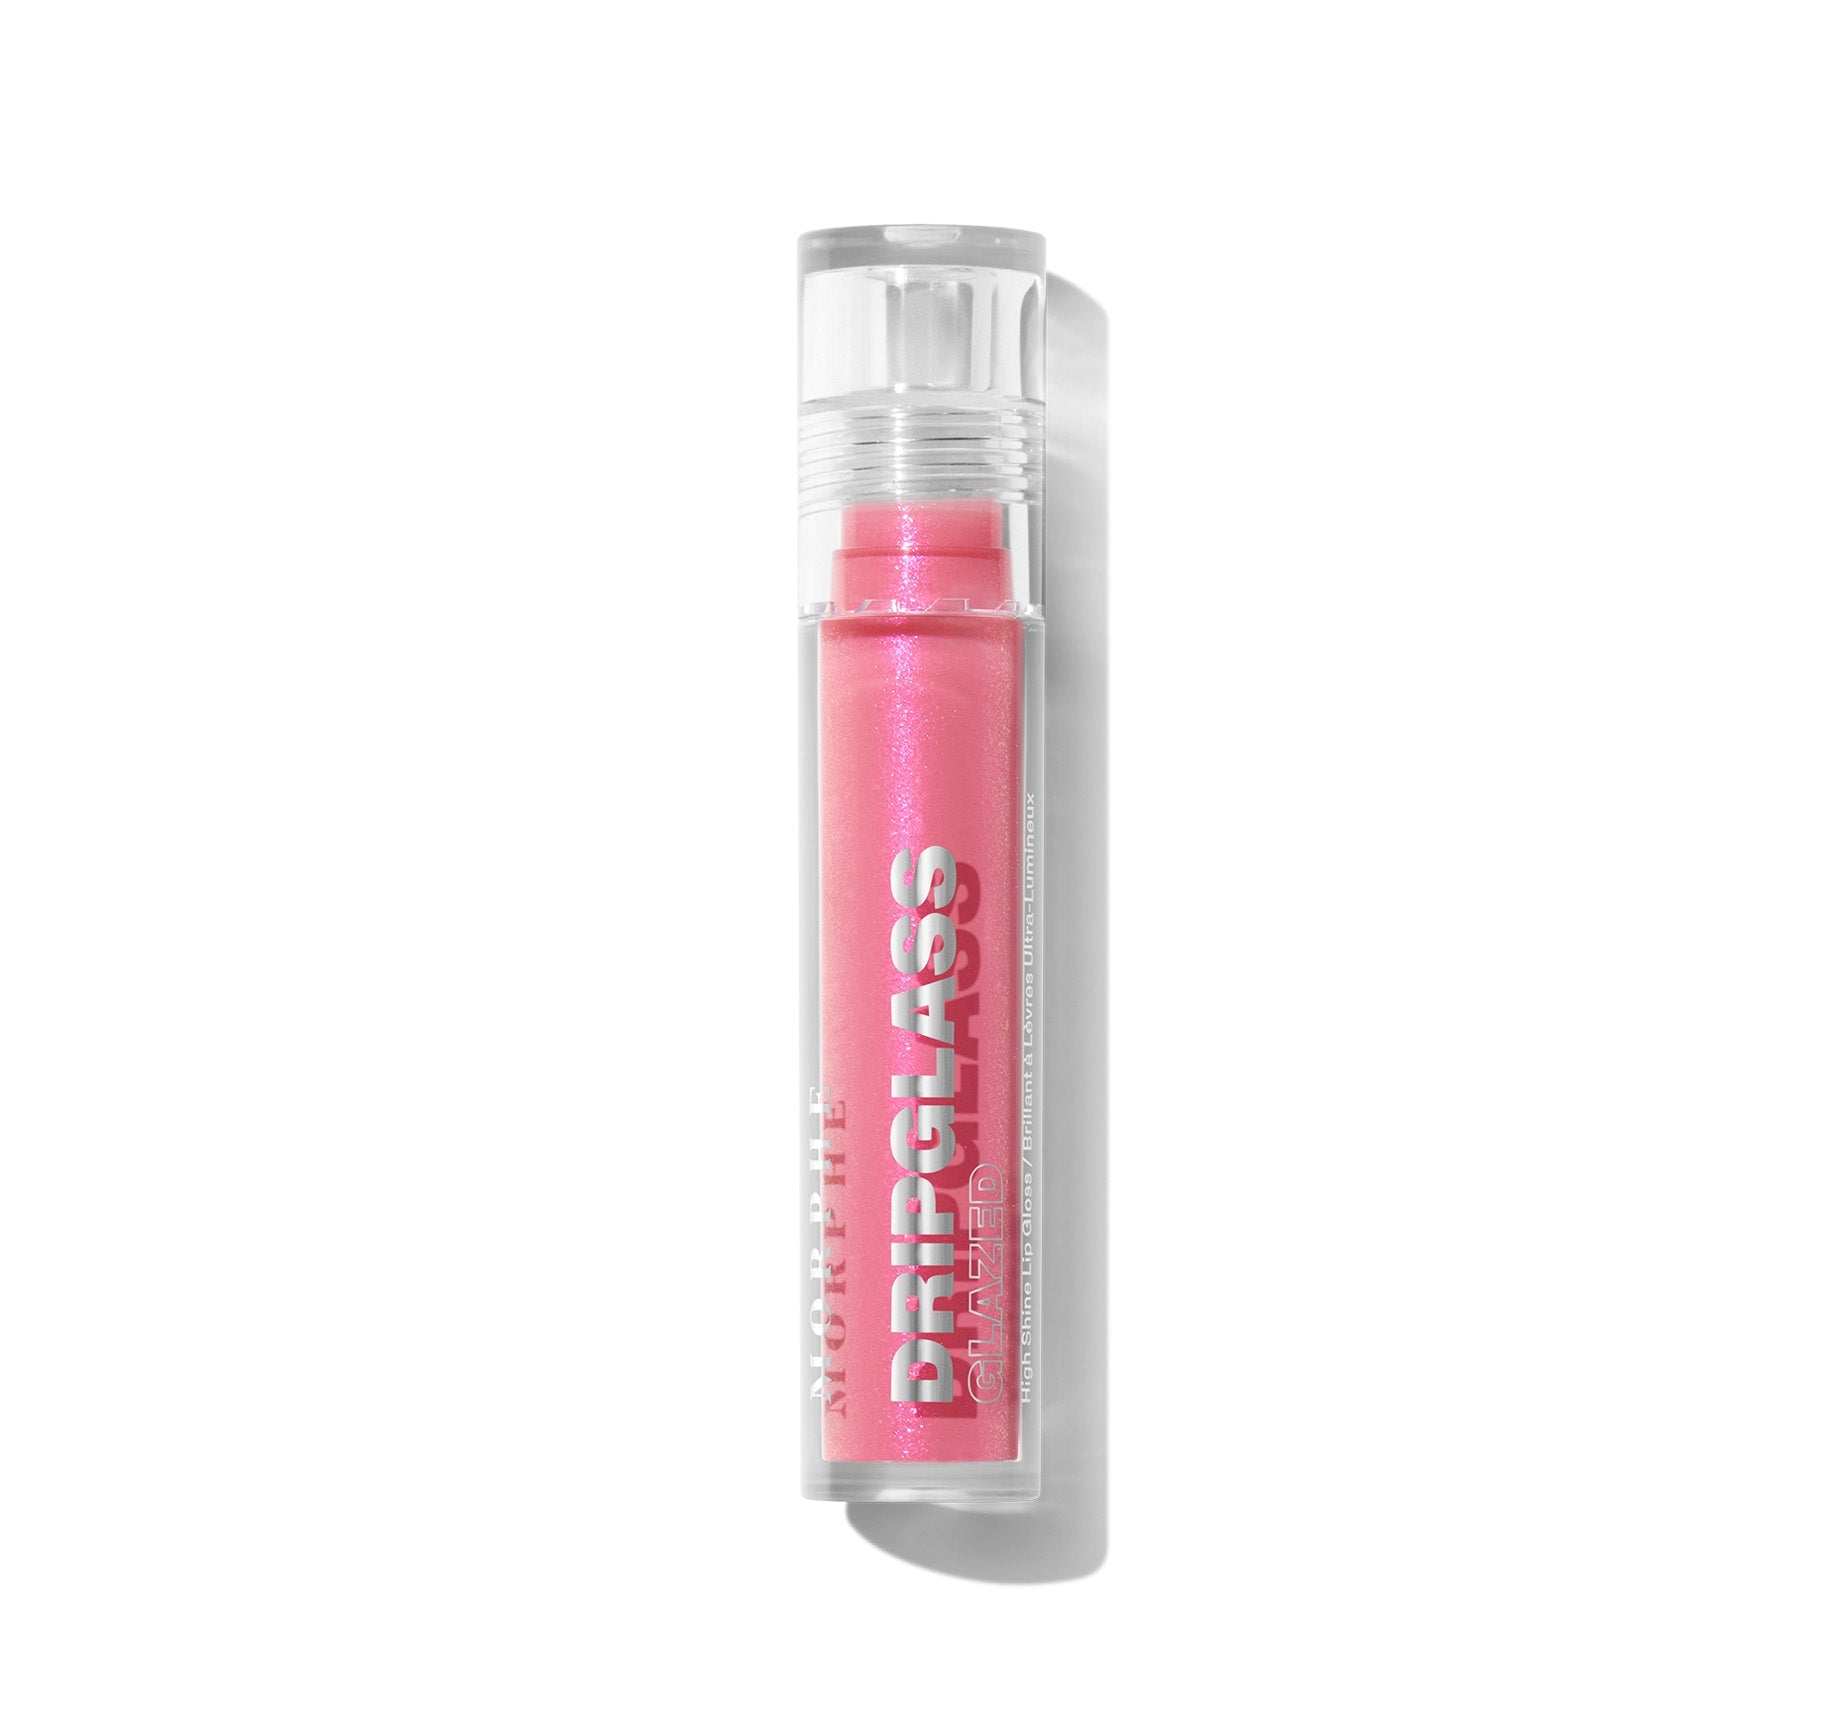 Dripglass Glazed High Shine Lip Gloss - Opalescent Orchid - Image 8